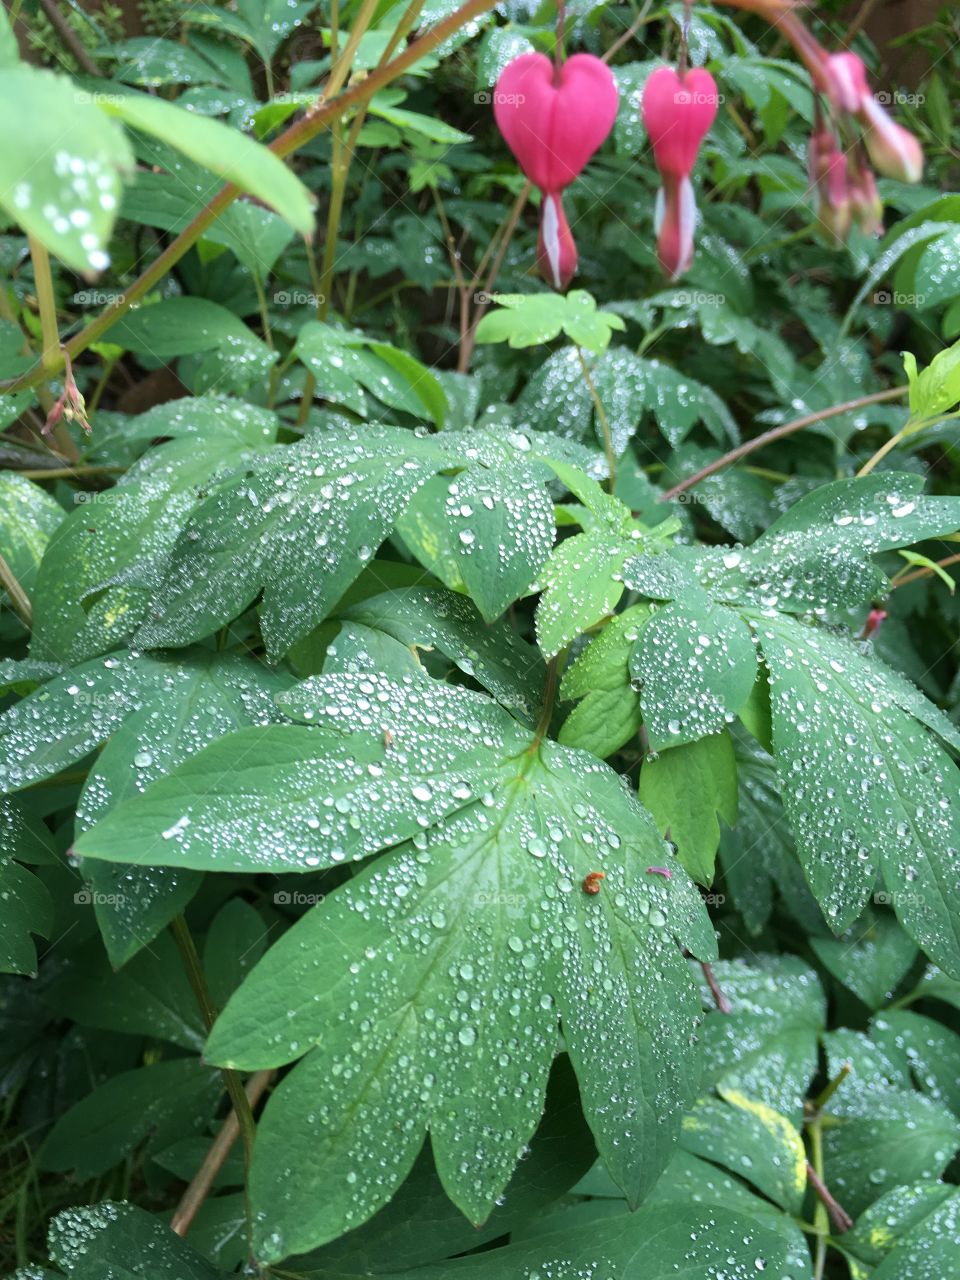 Raindrops on the leaves of a bleeding heart Dicentra plant after a damp summer night